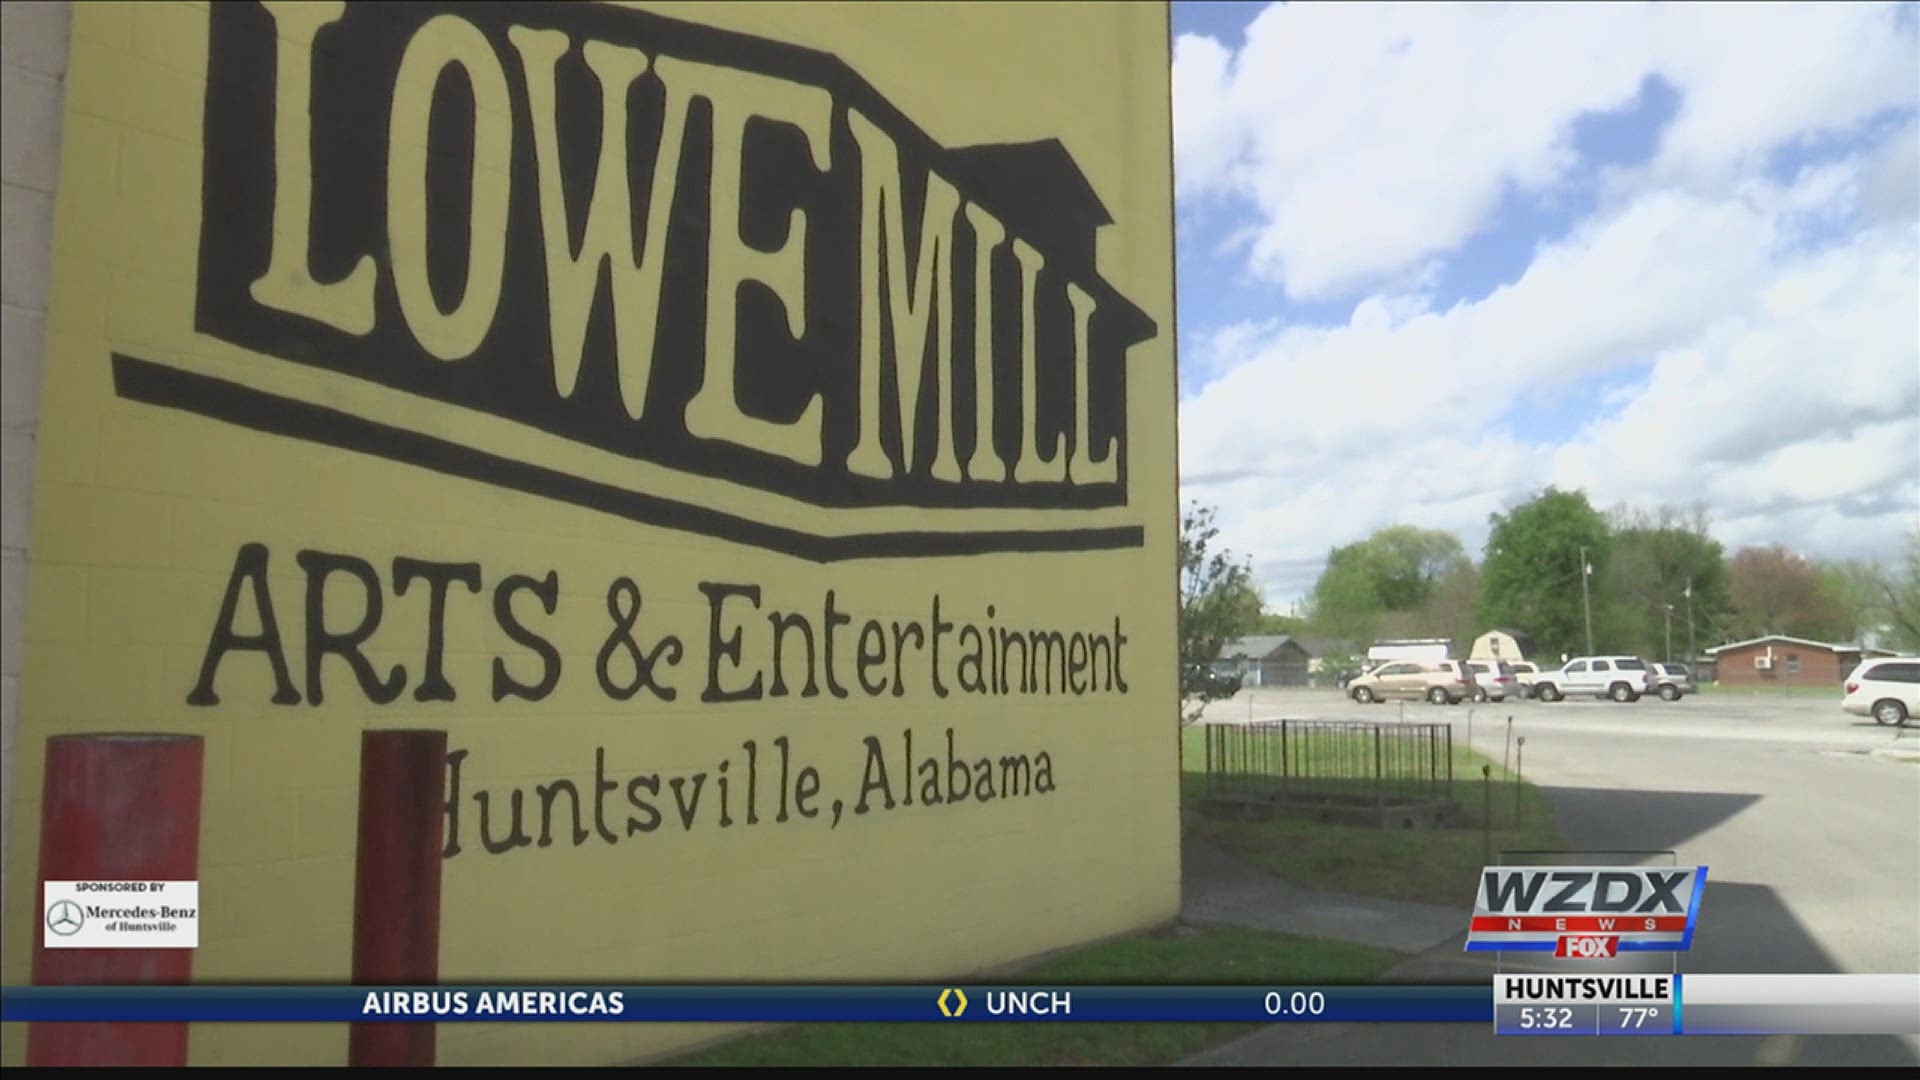 Lowe Mill ARTS & Entertainment will still require employees and patrons to wear masks.